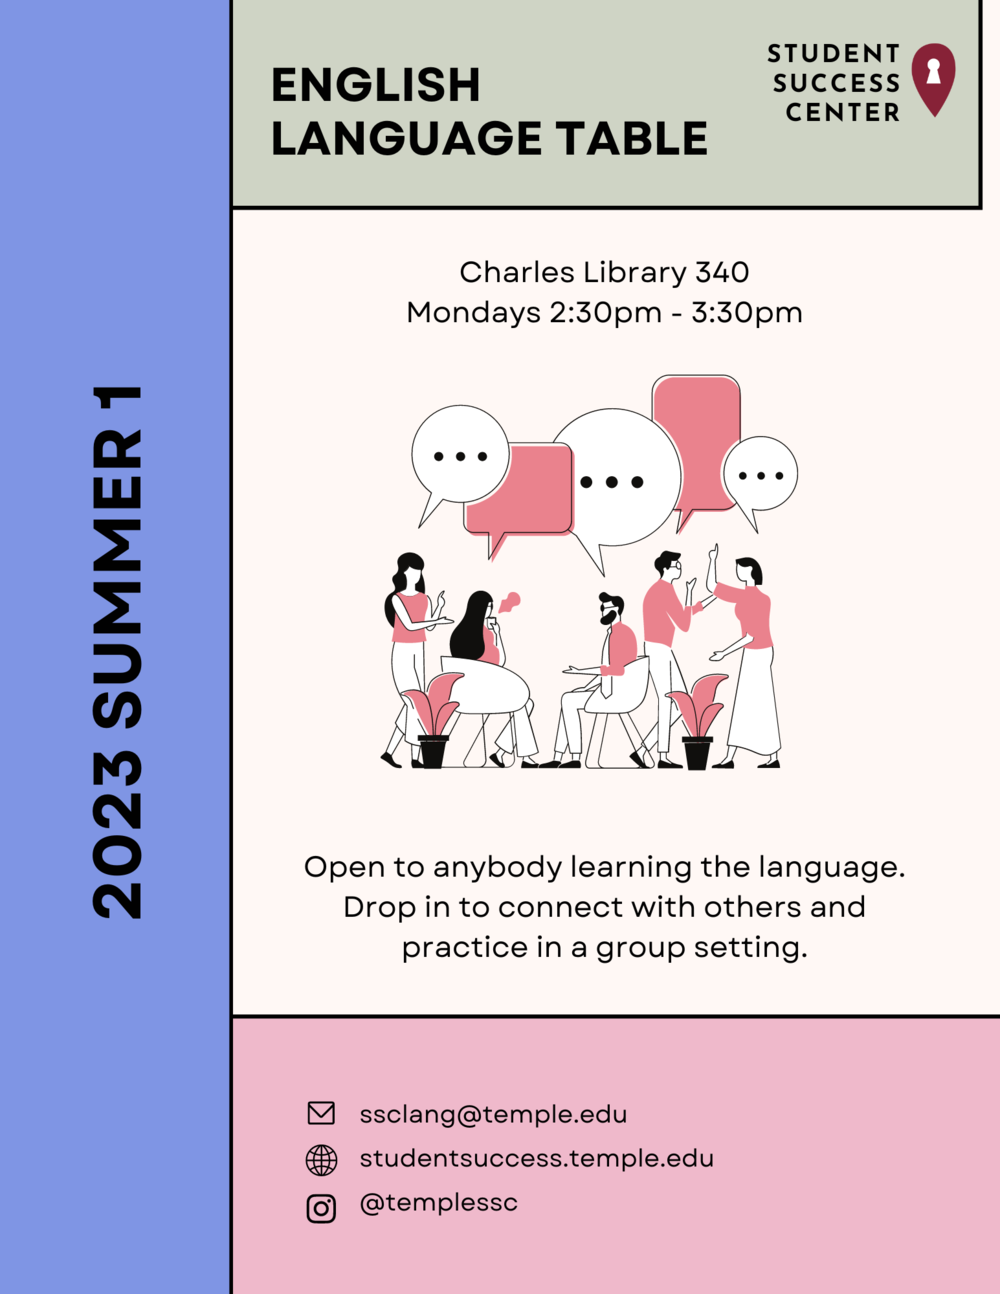 Flyer for English table shows in image of people chatting and provides the time and place for the table